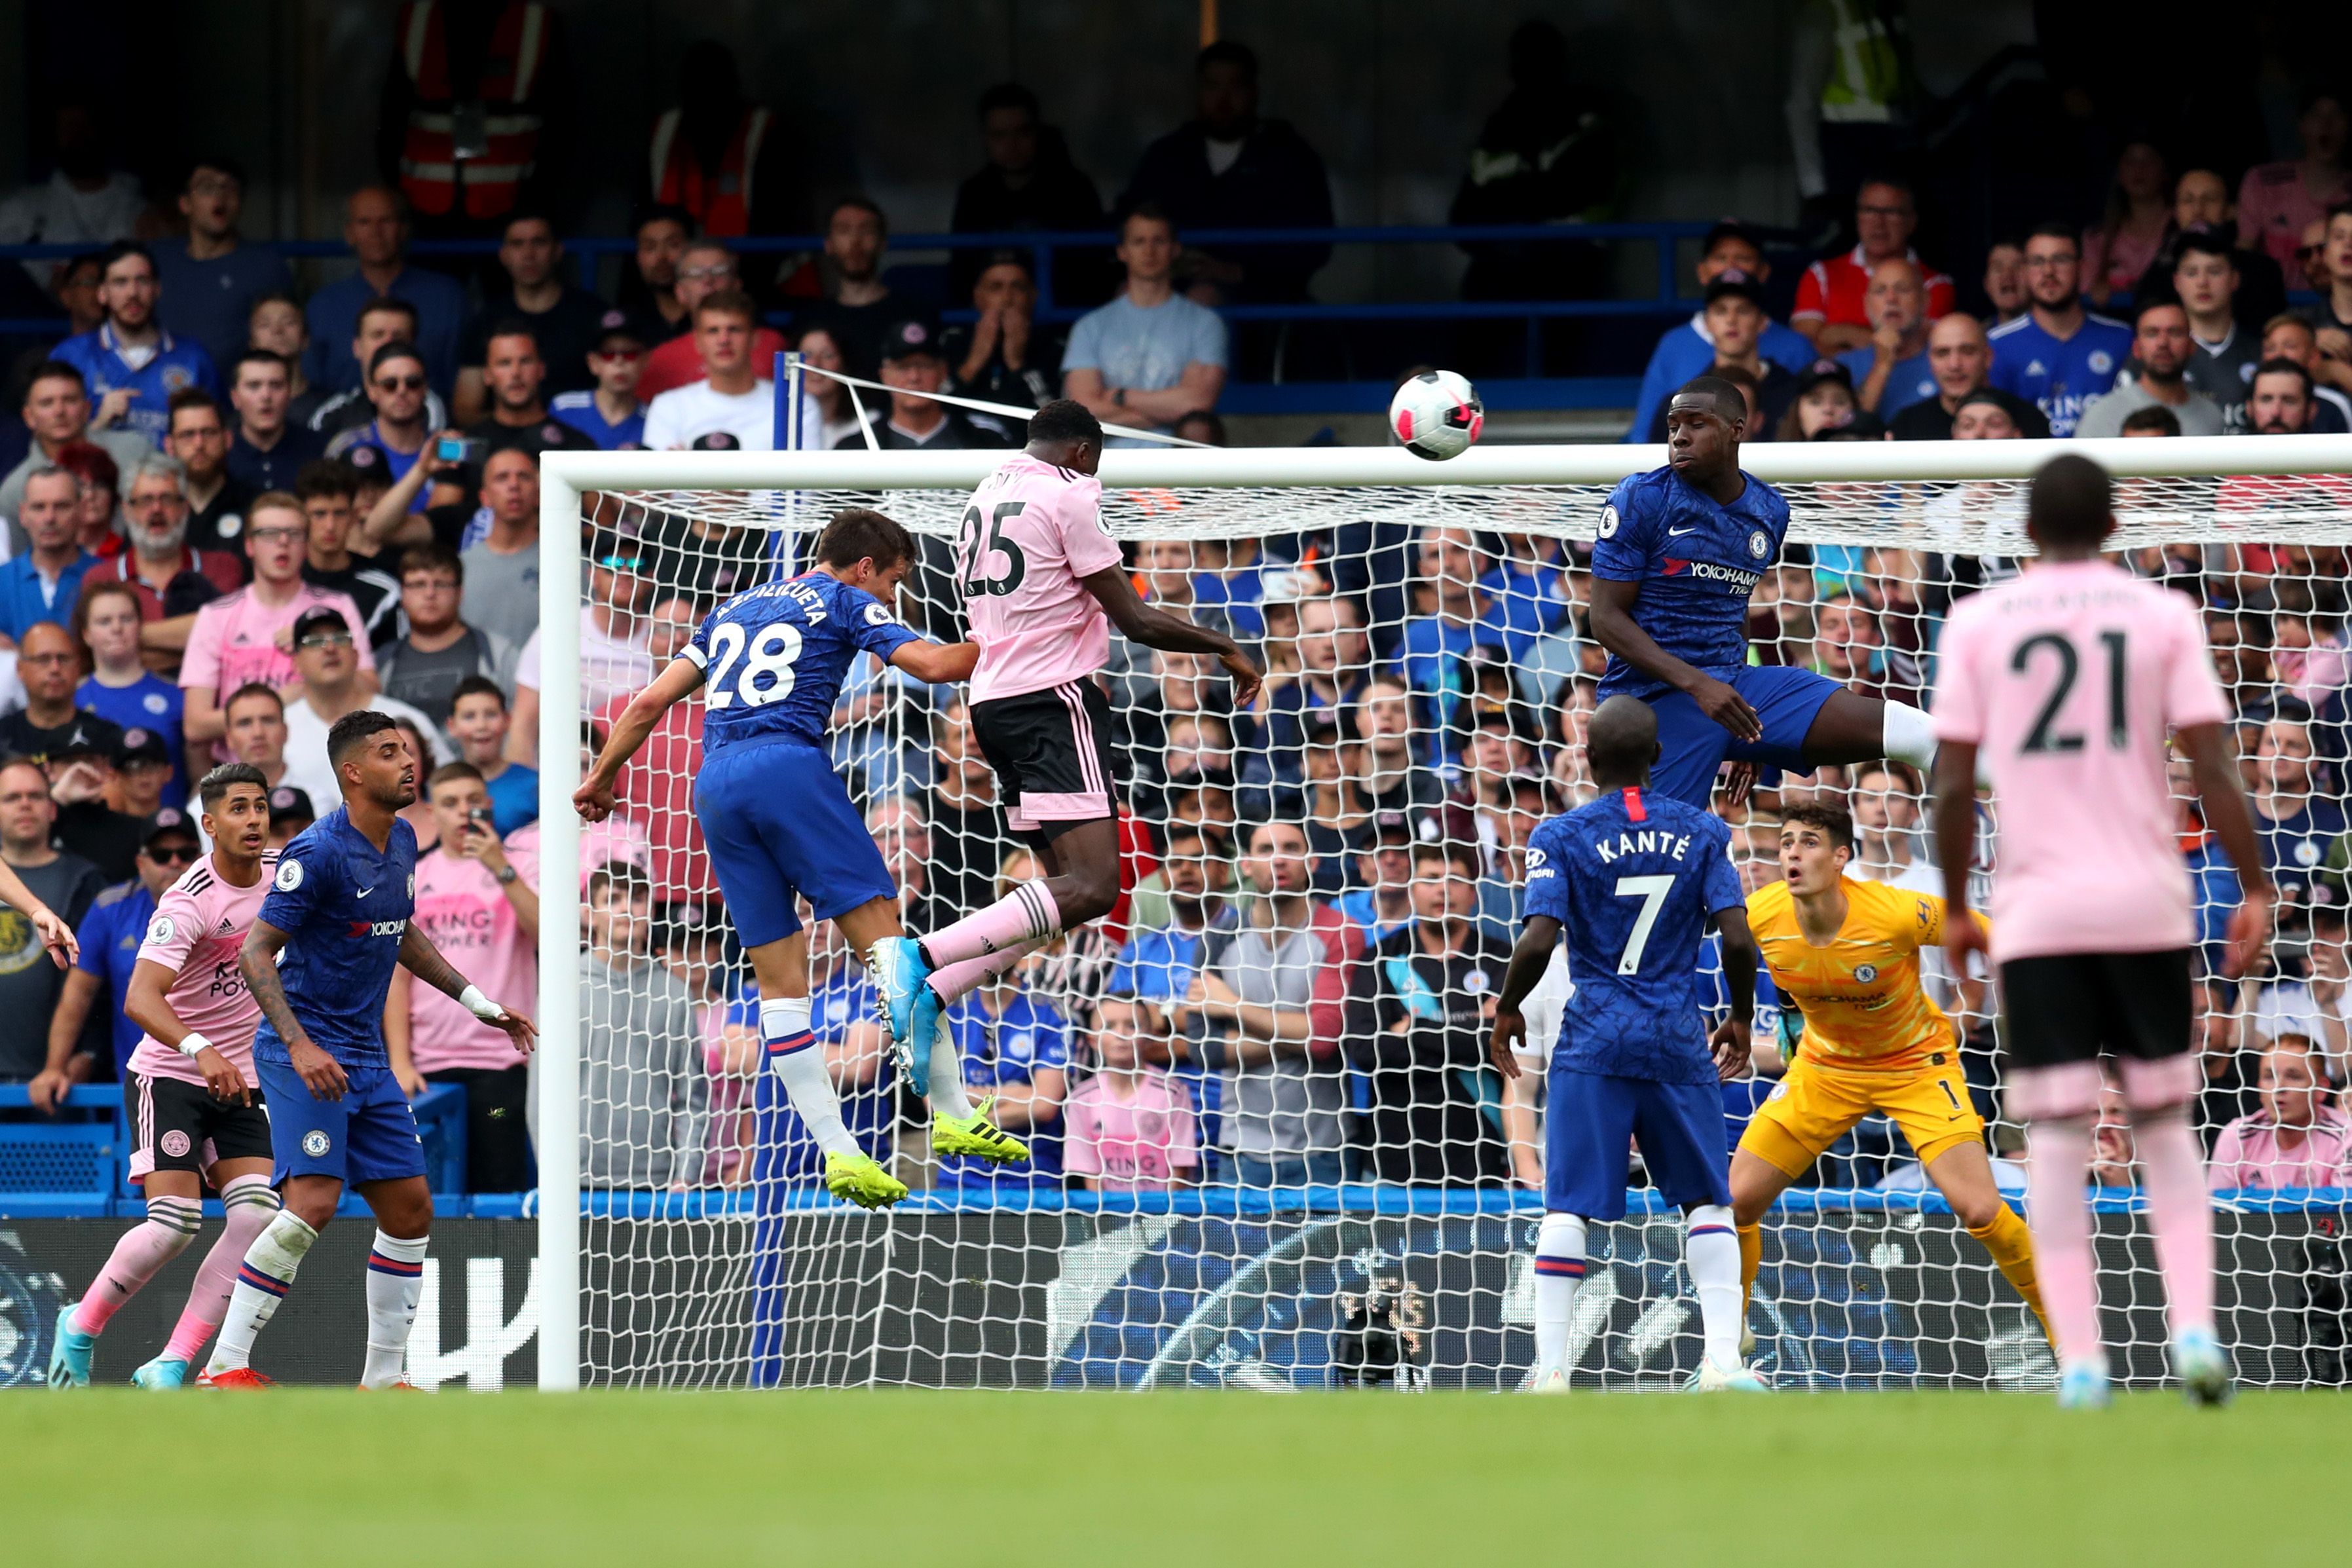 LONDON, ENGLAND - AUGUST 18: Onyinye Wilfred Ndidi of Leicester City scores his team's first goal during the Premier League match between Chelsea FC and Leicester City at Stamford Bridge on August 18, 2019 in London, United Kingdom. (Photo by Catherine Ivill/Getty Images)